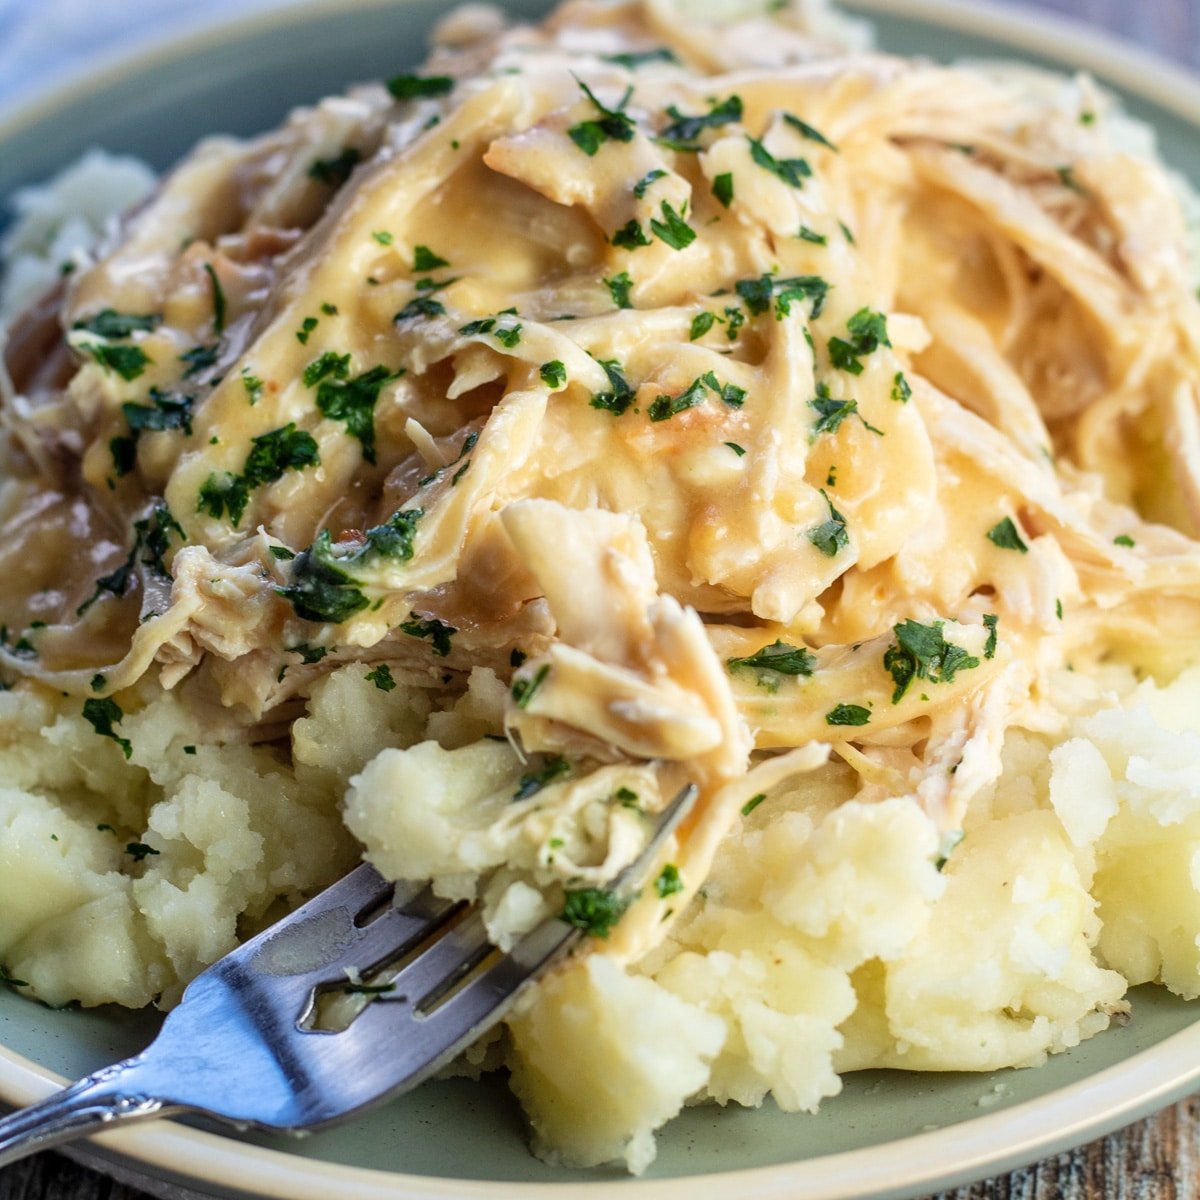 Crockpot chicken and gravy served over mashed potatoes with parsley garnish.